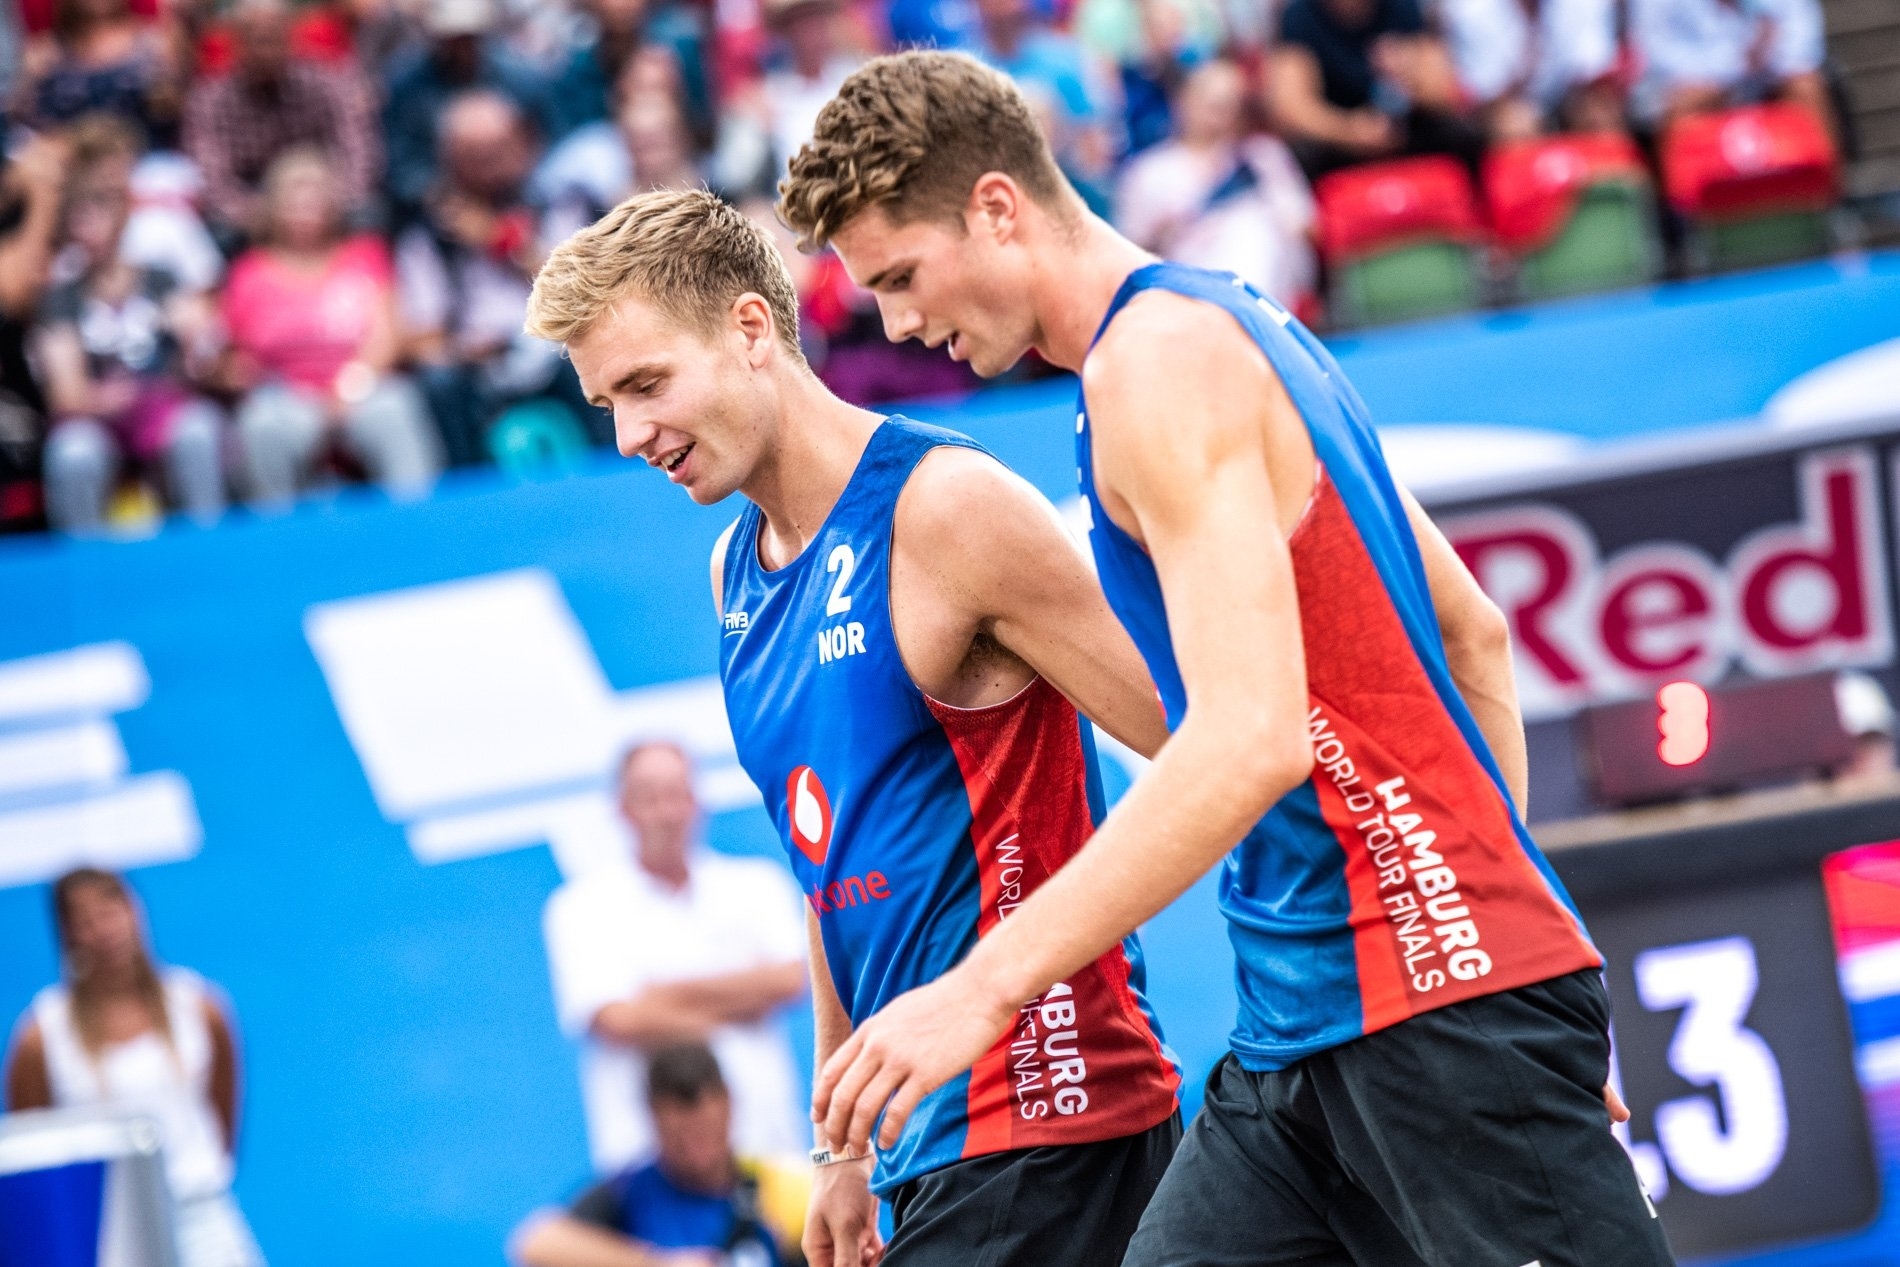 Anders Mol and Christian Sørum will be aiming to extend their unbeaten run even further on Thursday